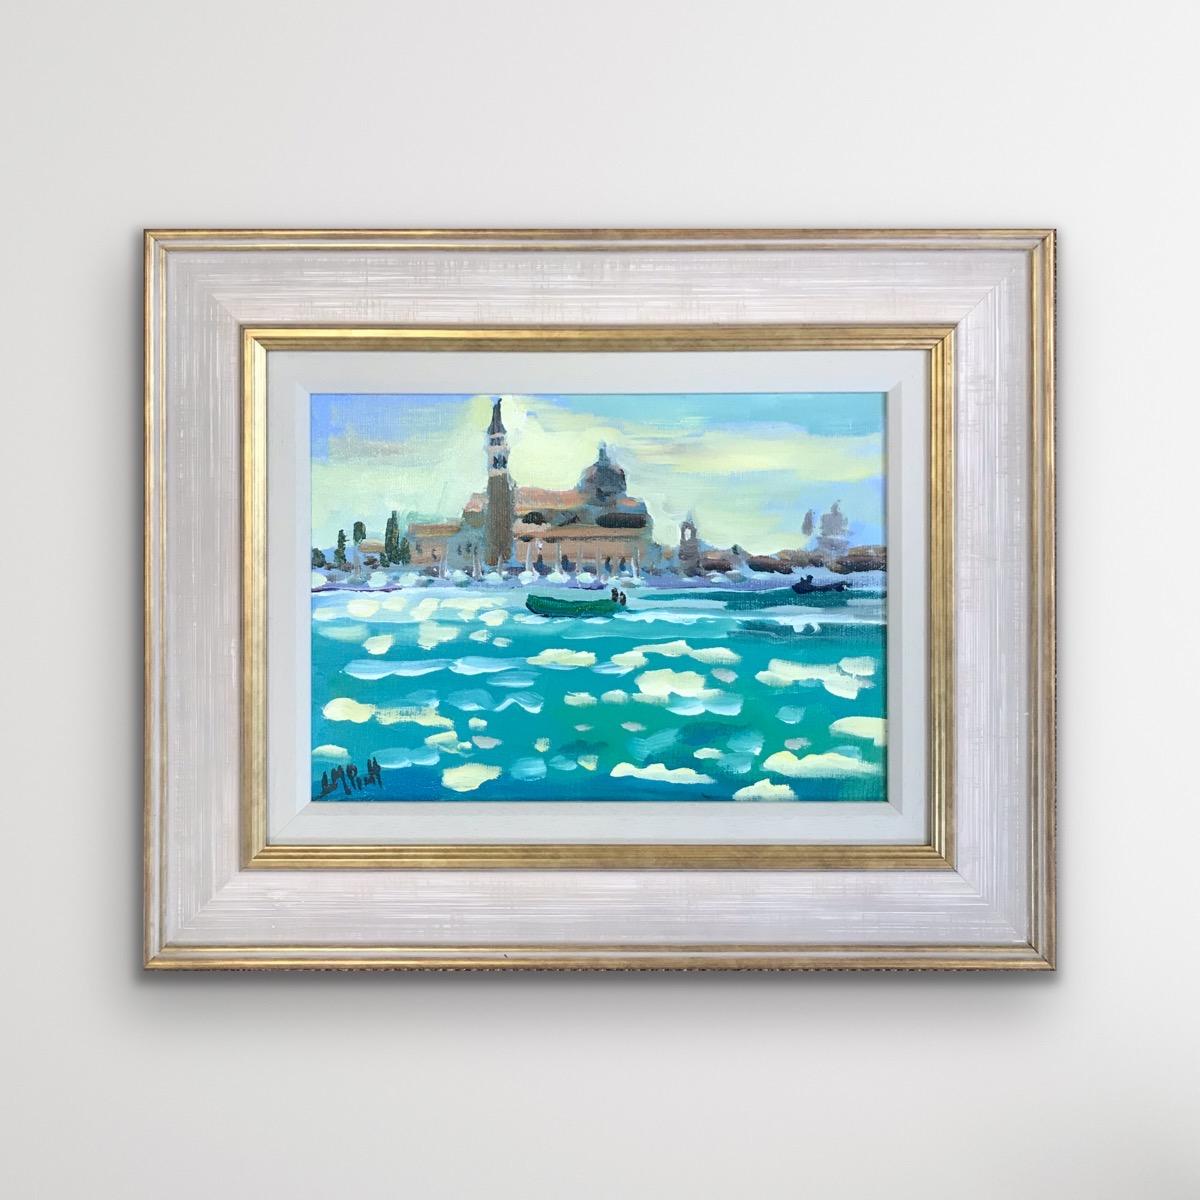 Gondolas At St Mark's, Venice is an original oil on board painting by artist Lucy Pratt. This painting features her beautiful and considered use of impressionist style mark making alongside a vibrant colour palette. Sold framed in a layered white